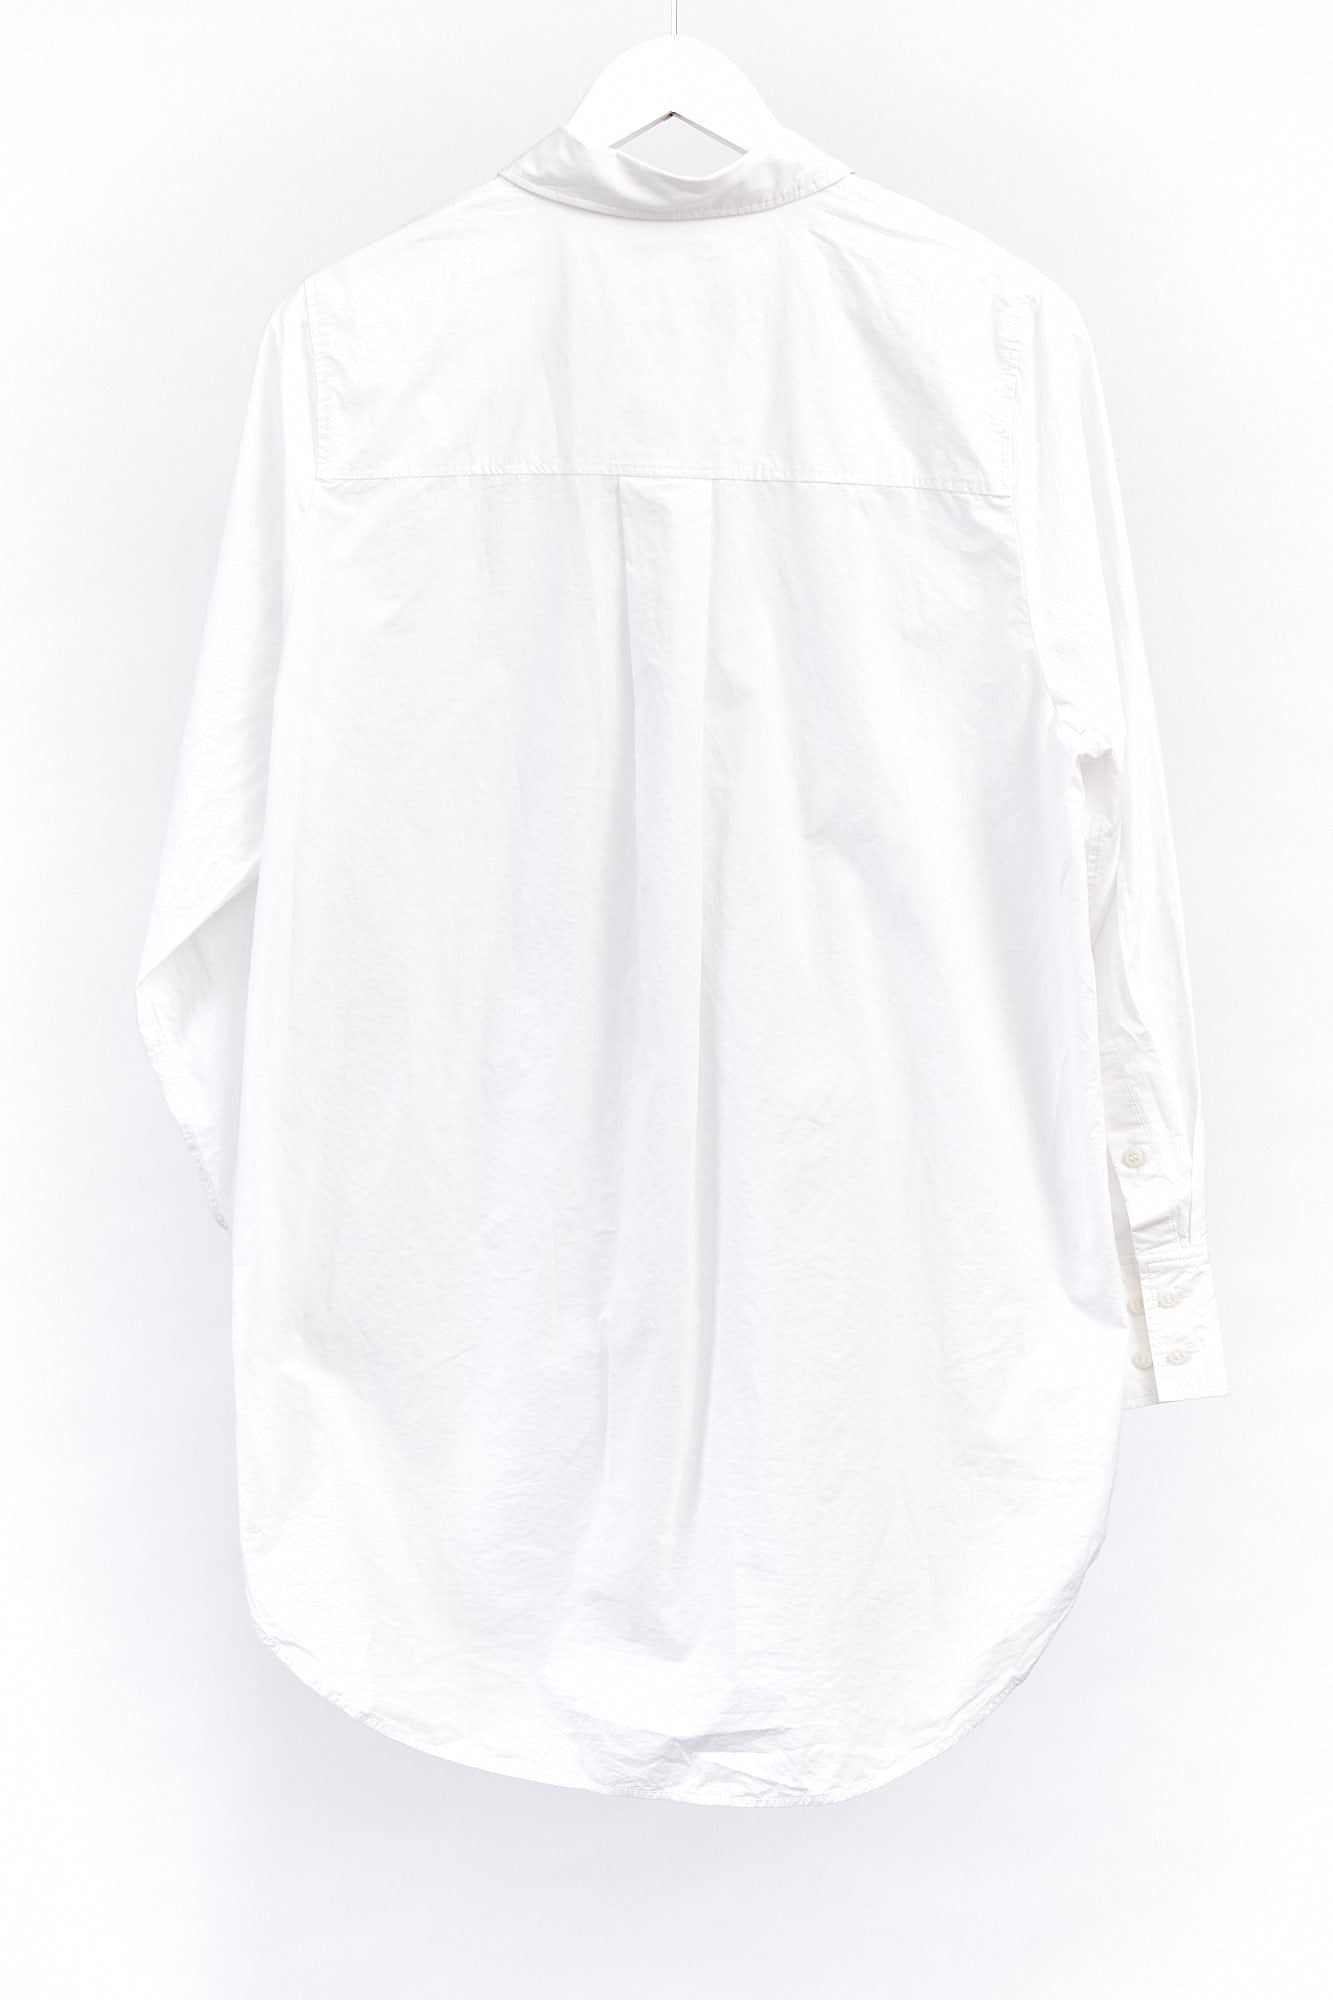 Womens Cos oversized white shirt size small